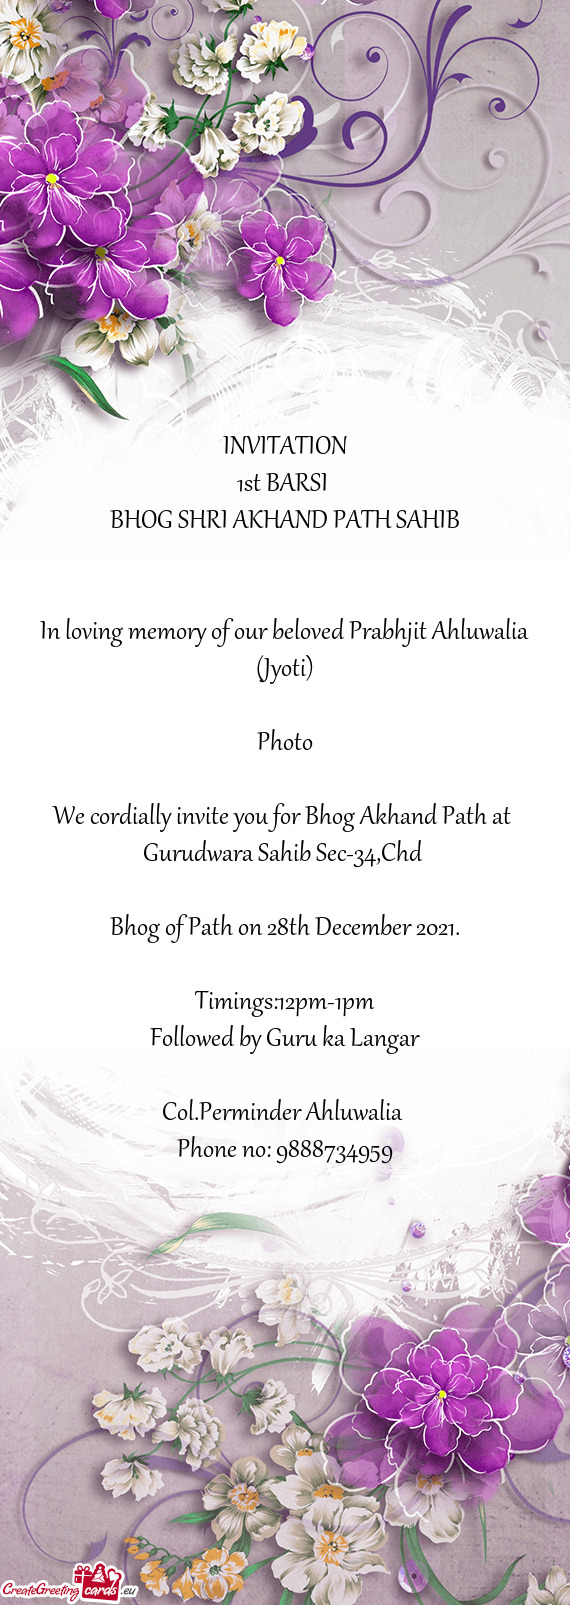 We cordially invite you for Bhog Akhand Path at